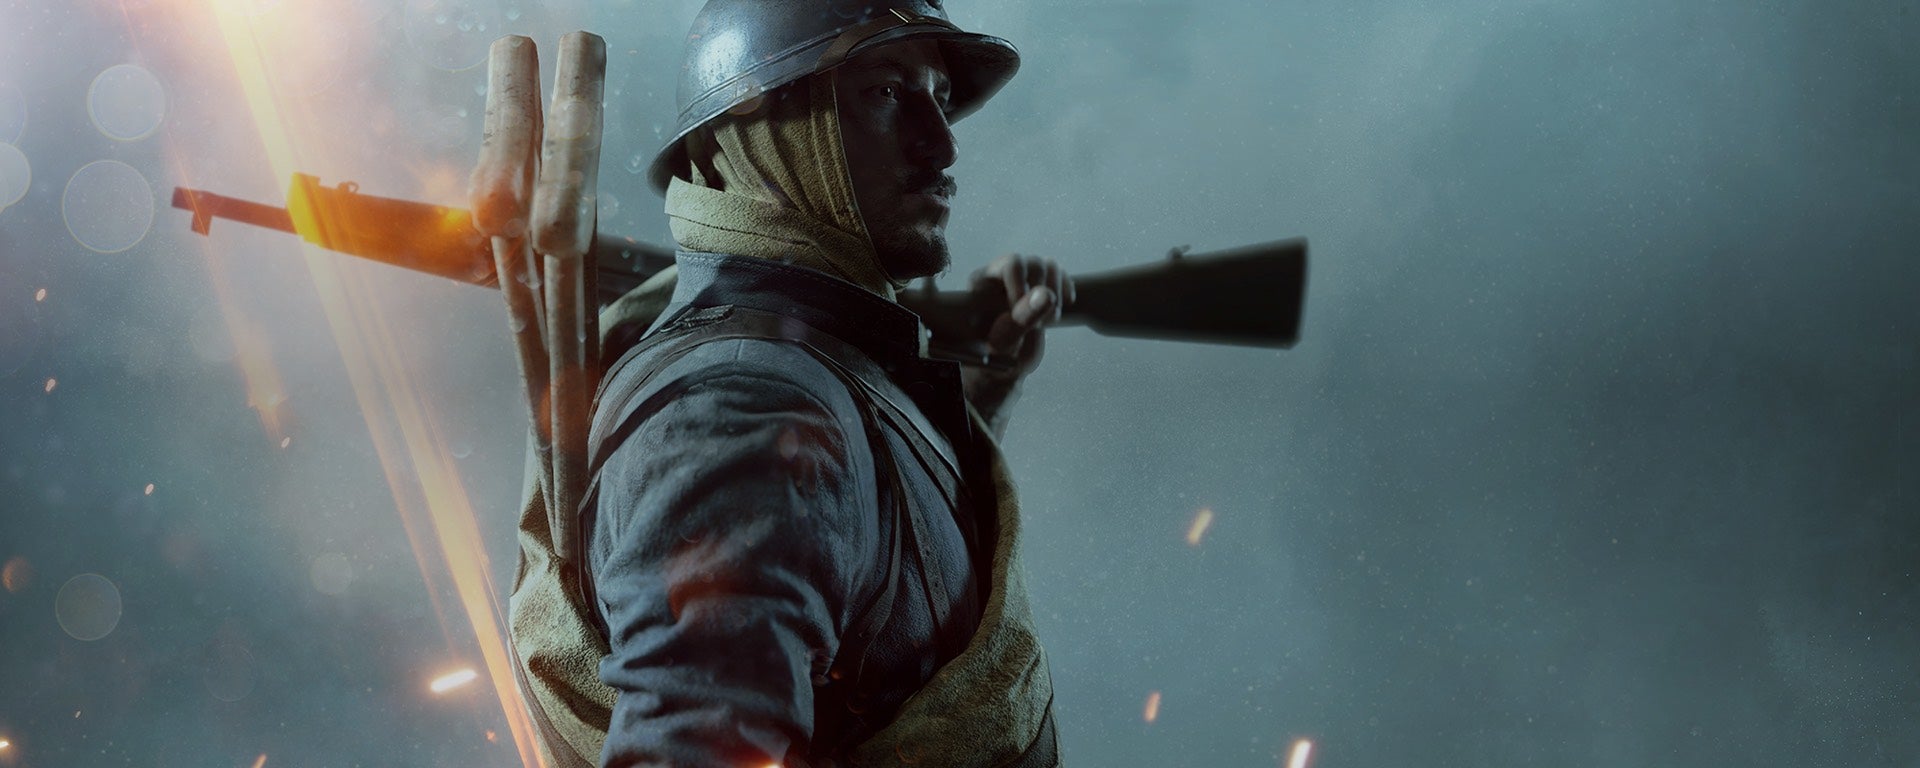 Image for How to find the Dark Souls Easter egg in Battlefield 1's Rupture map